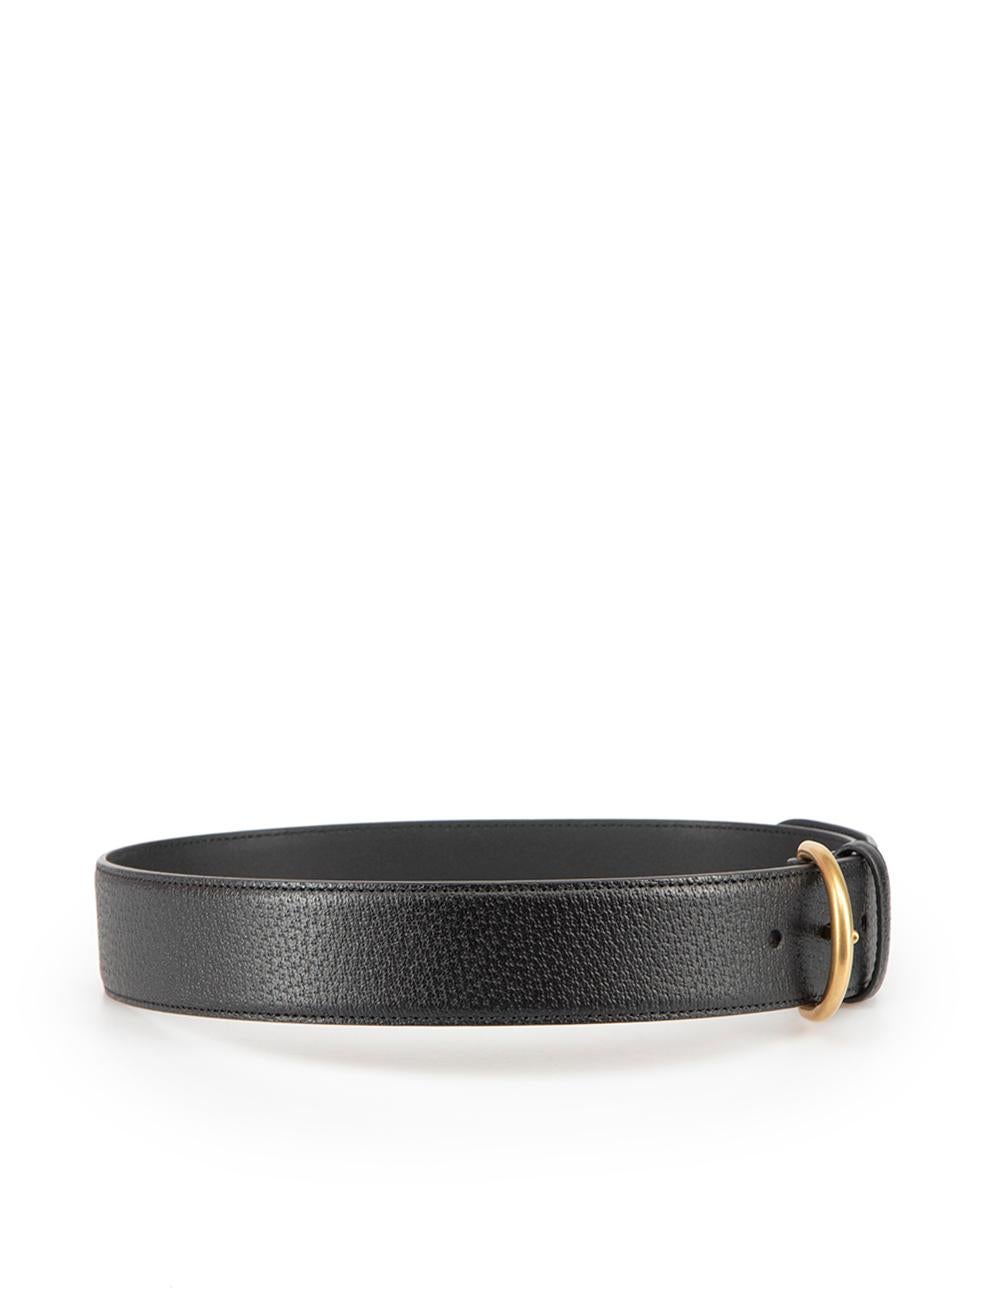 CONDITION is Very good. Hardly any visible wear to belt is evident on this used Gucci designer resale item.

Details
Black
Leather
Belt
Textured
Gold tone hardware
D buckle
Made in Italy

Composition
EXTERIOR: Leather
INTERIOR: Leather

Size &